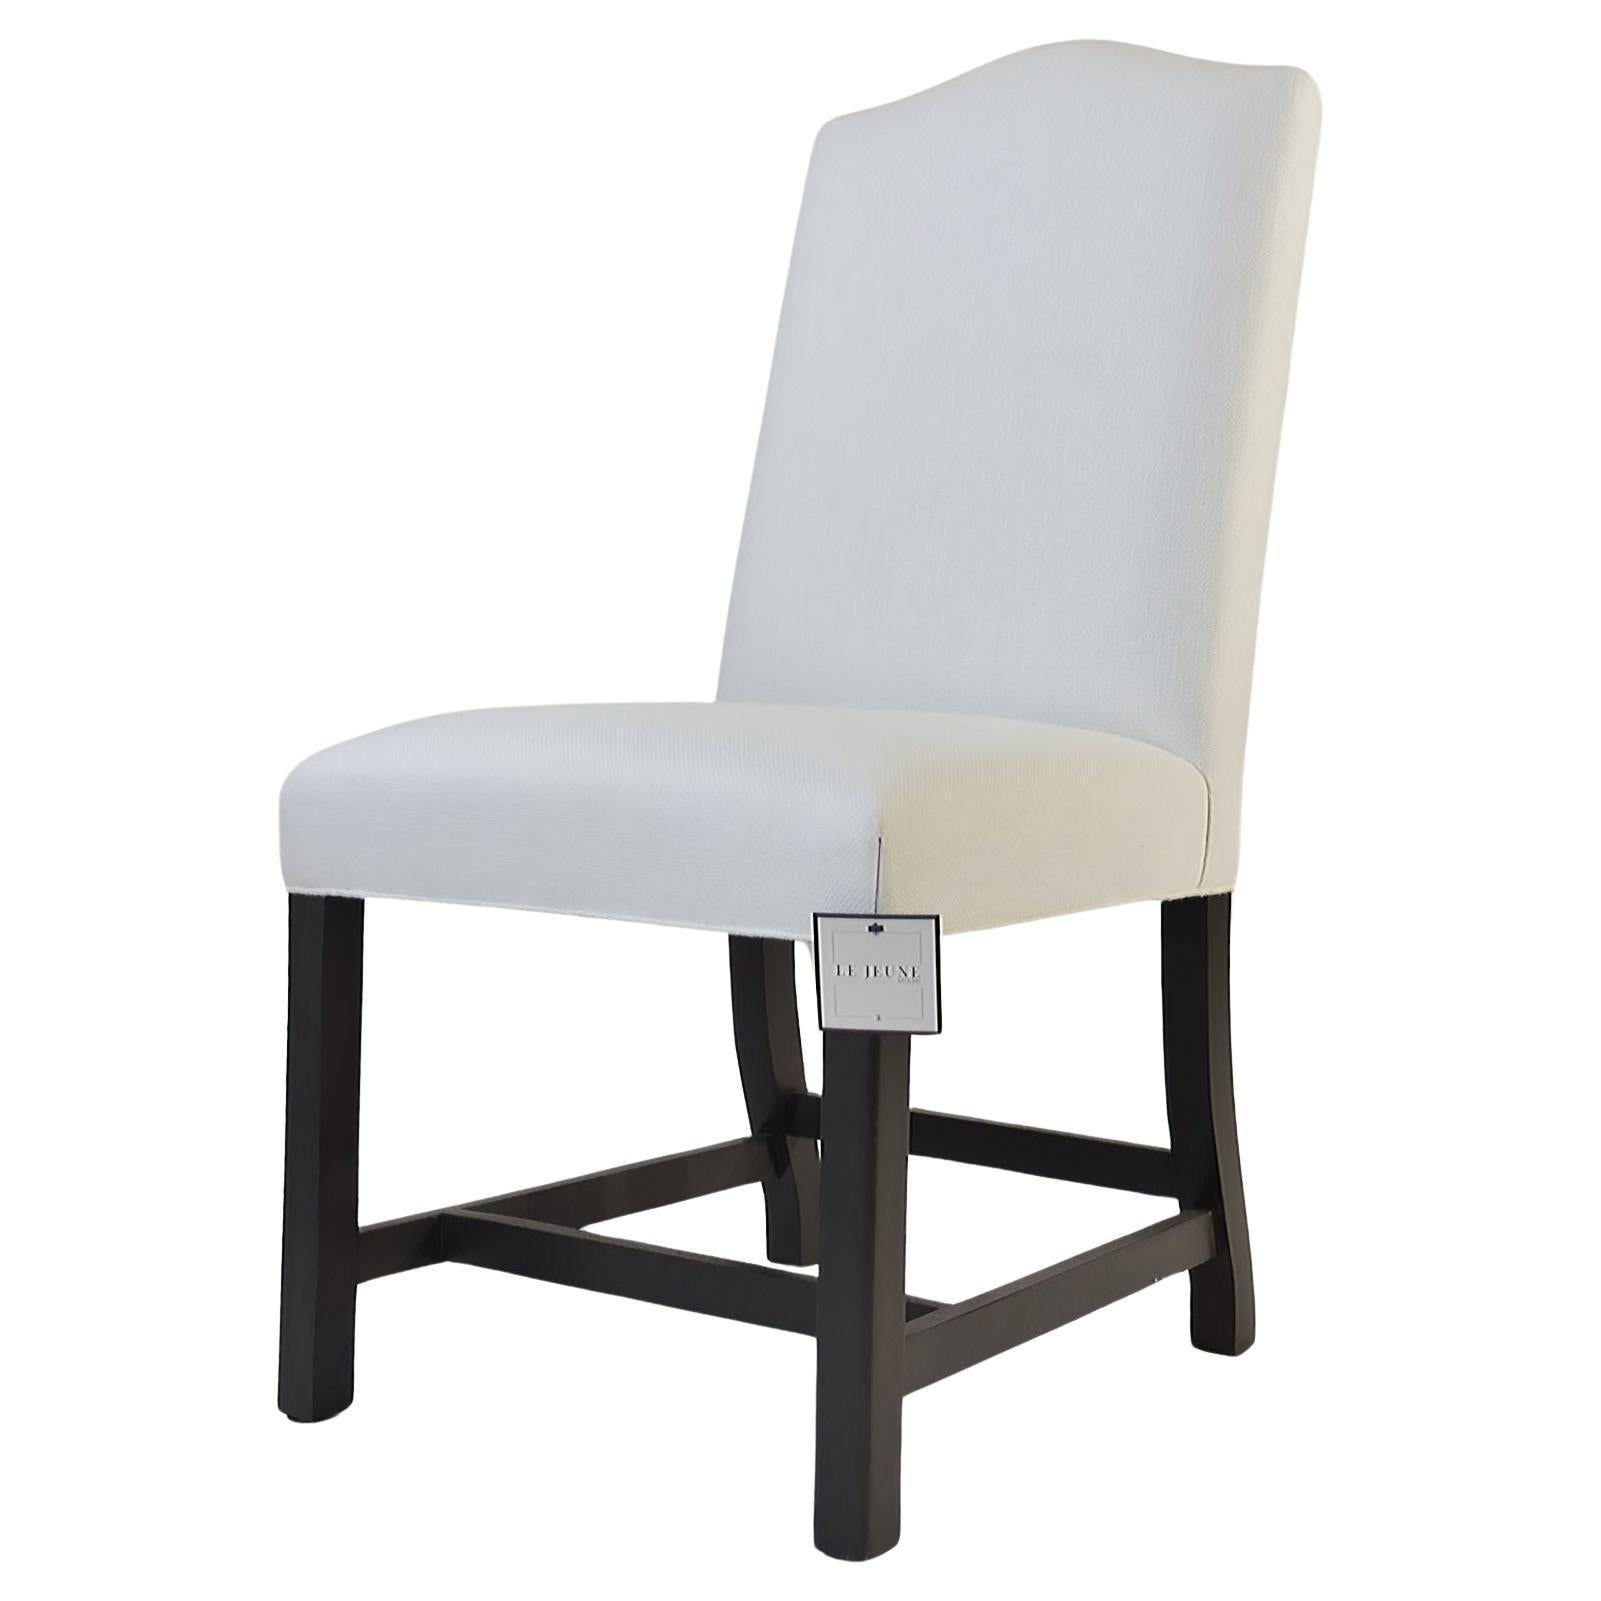 Le Jeune Upholstery Hampshire Armless Dining Side Chair DC1.923 Showroom Model For Sale